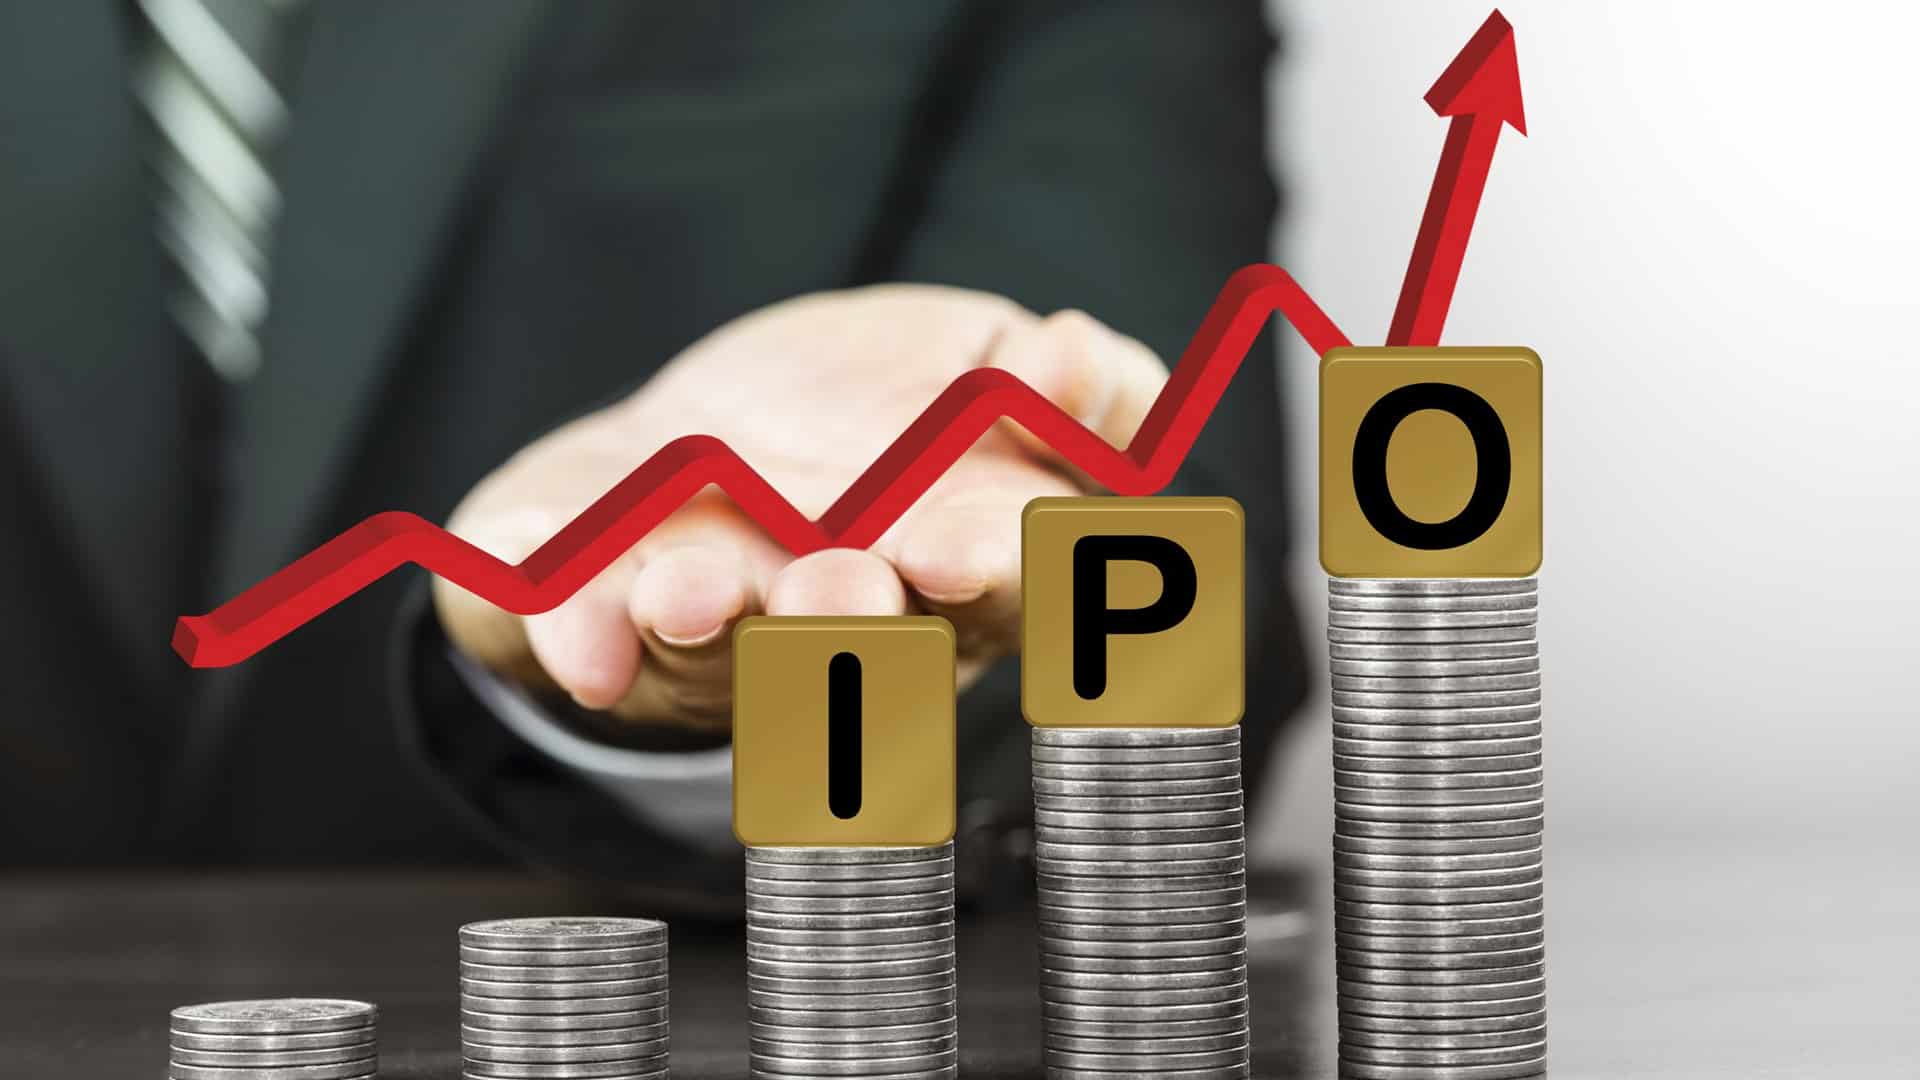 Adani Wilmar to use Rs 450 cr from IPO proceeds to tap inorganic growth